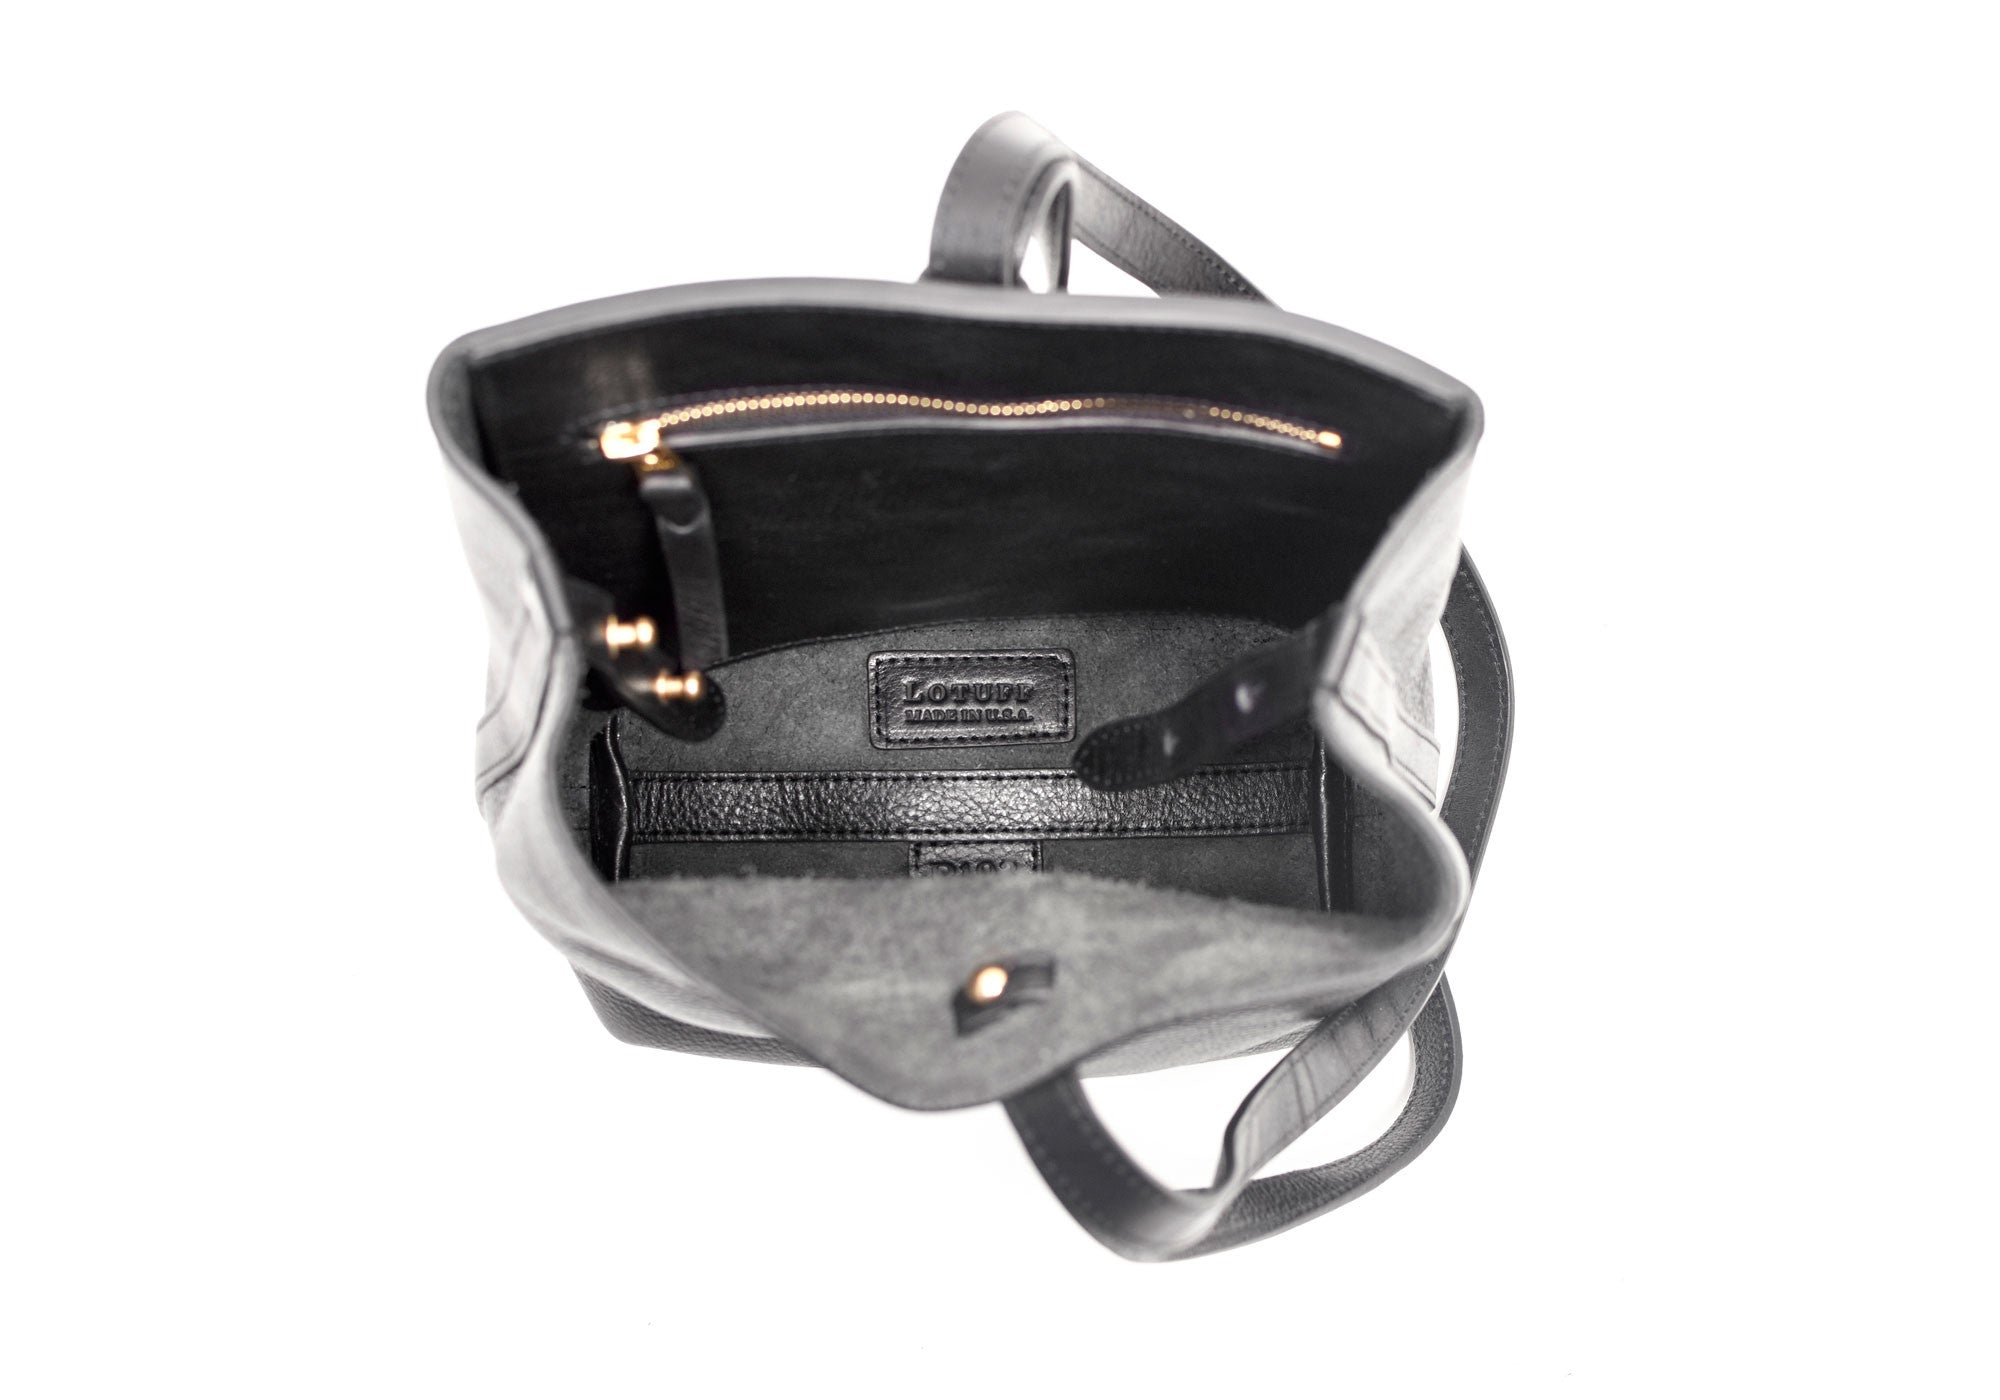 Inner Leather View of The Mini Sling Backpack Black